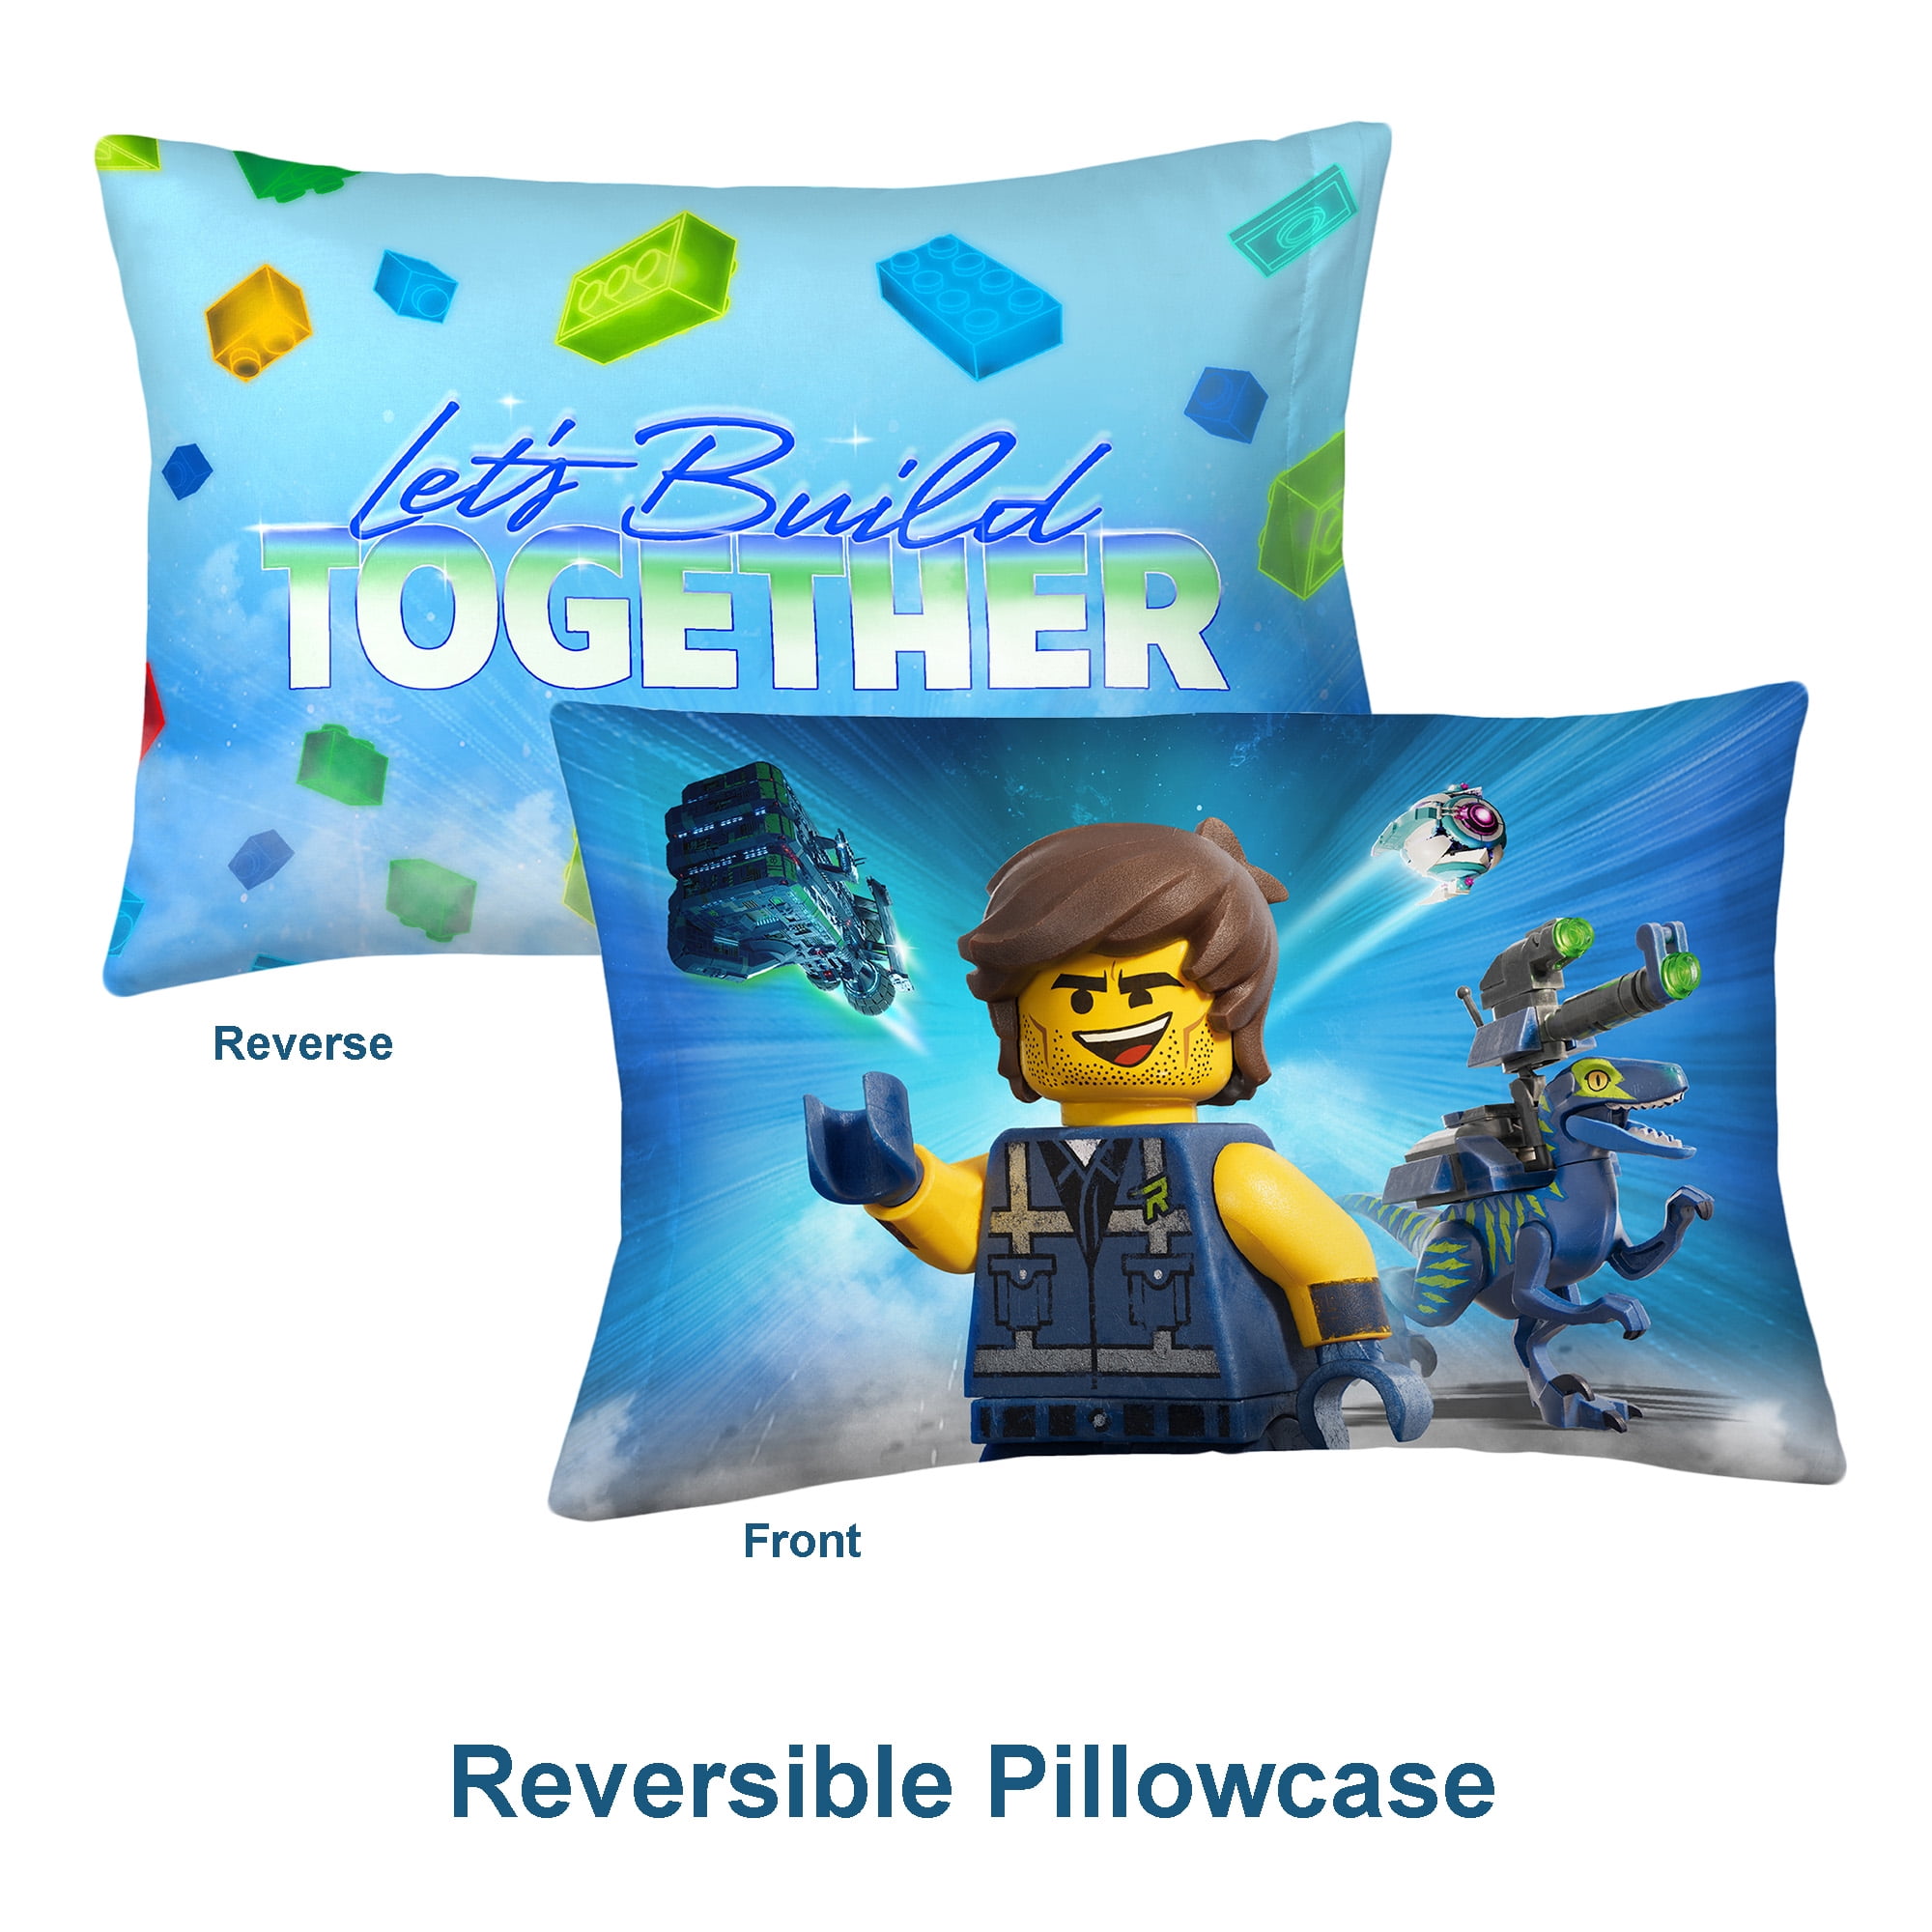 Blue Ultra Soft Microfiber Pillowcase for Kids. Playtime Story-Time Pillowcase with Over 20 Starter Sentences and Images